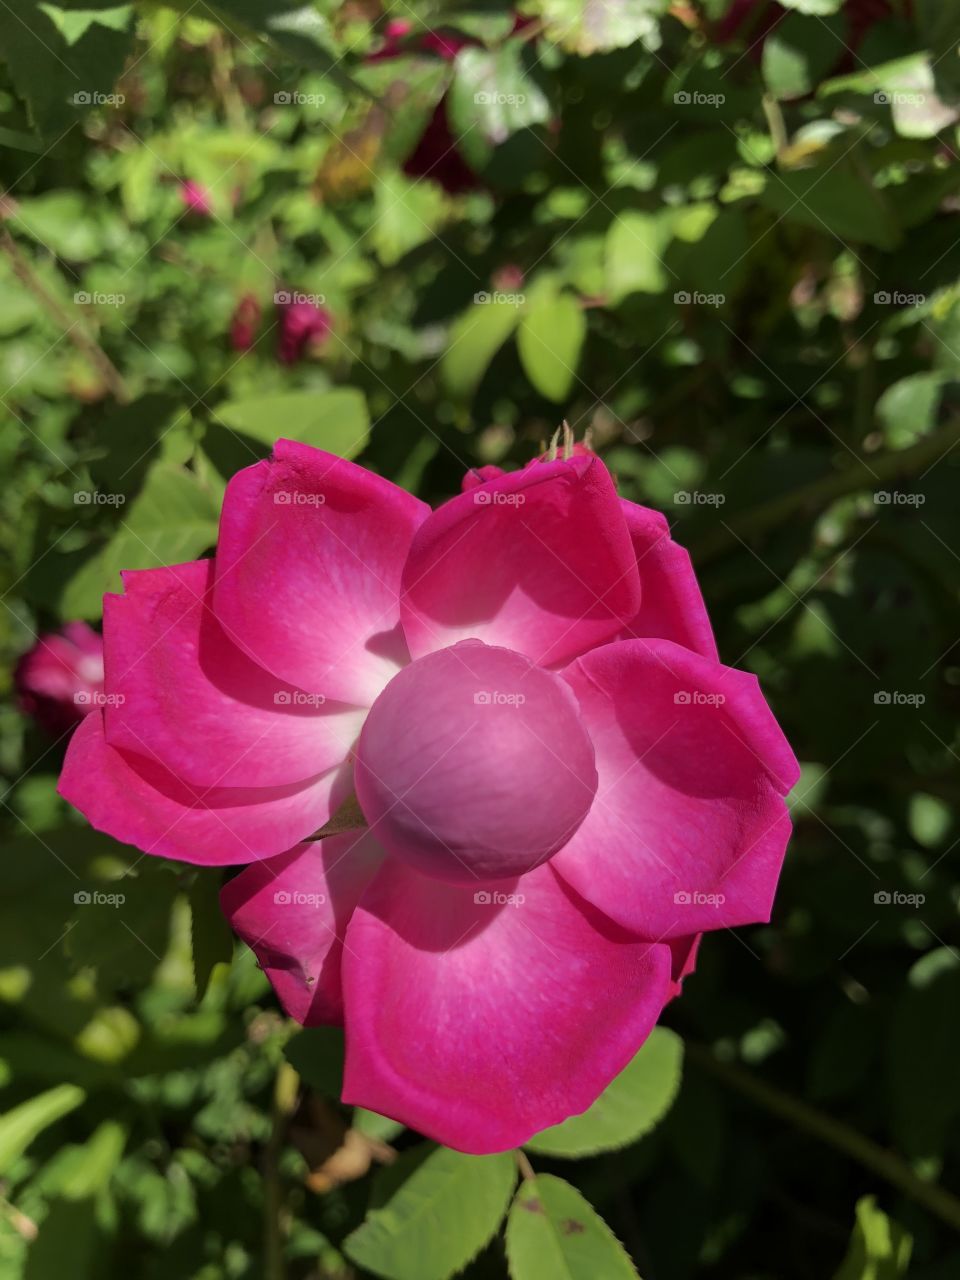 Dark pink rose with a ball growing in the middle of it.